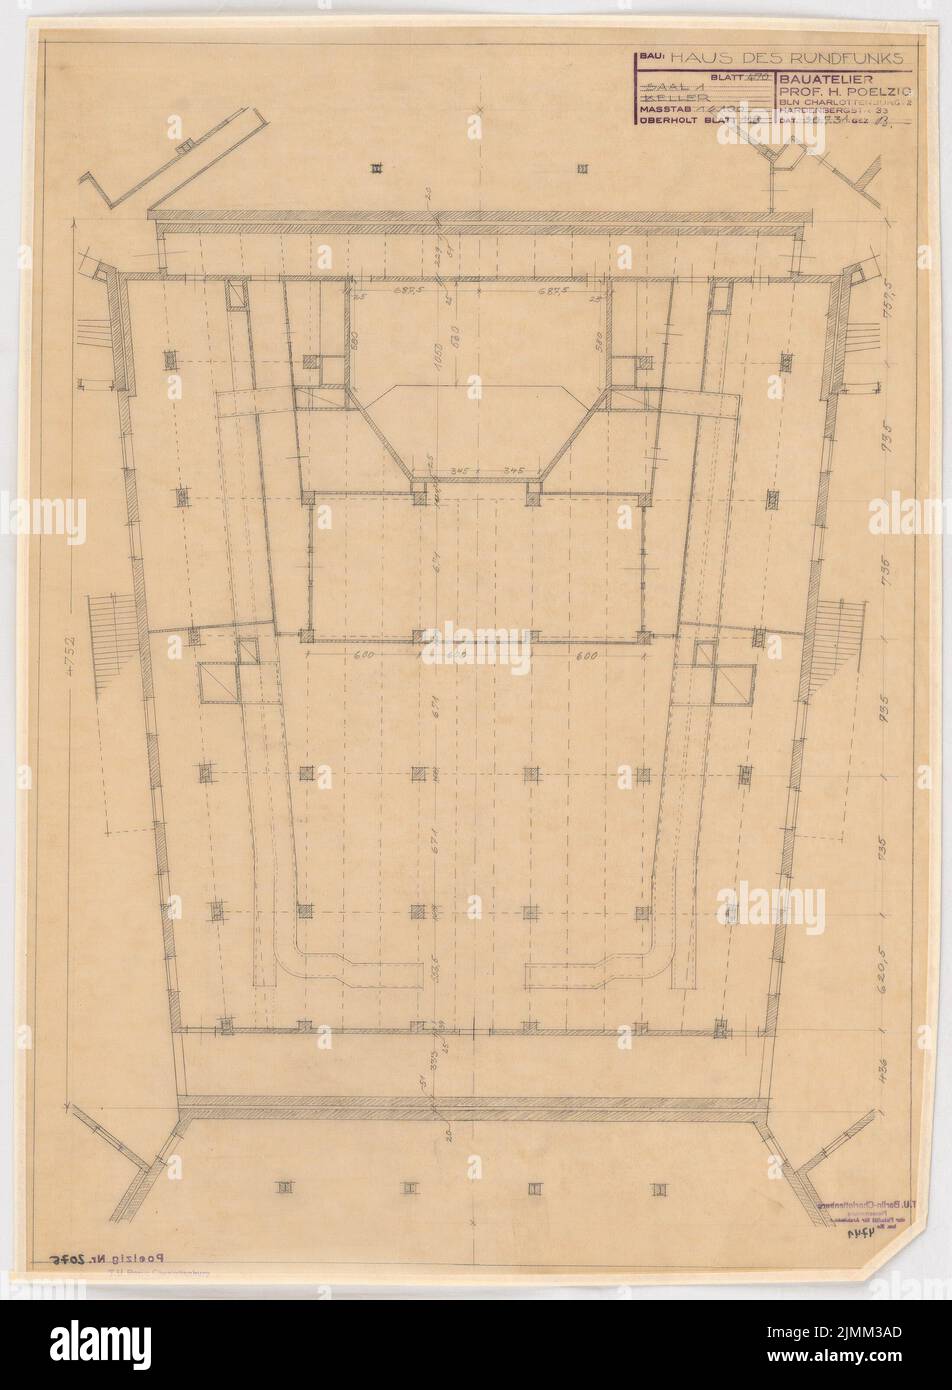 Poelzig Hans (1869-1936), Haus des Rundfunk, Berlin (July 30, 1931): Execution project, hall 1, floor plan KG 1: 100. Pencil on transparent, 69.4 x 50.8 cm (including scan edges) Stock Photo